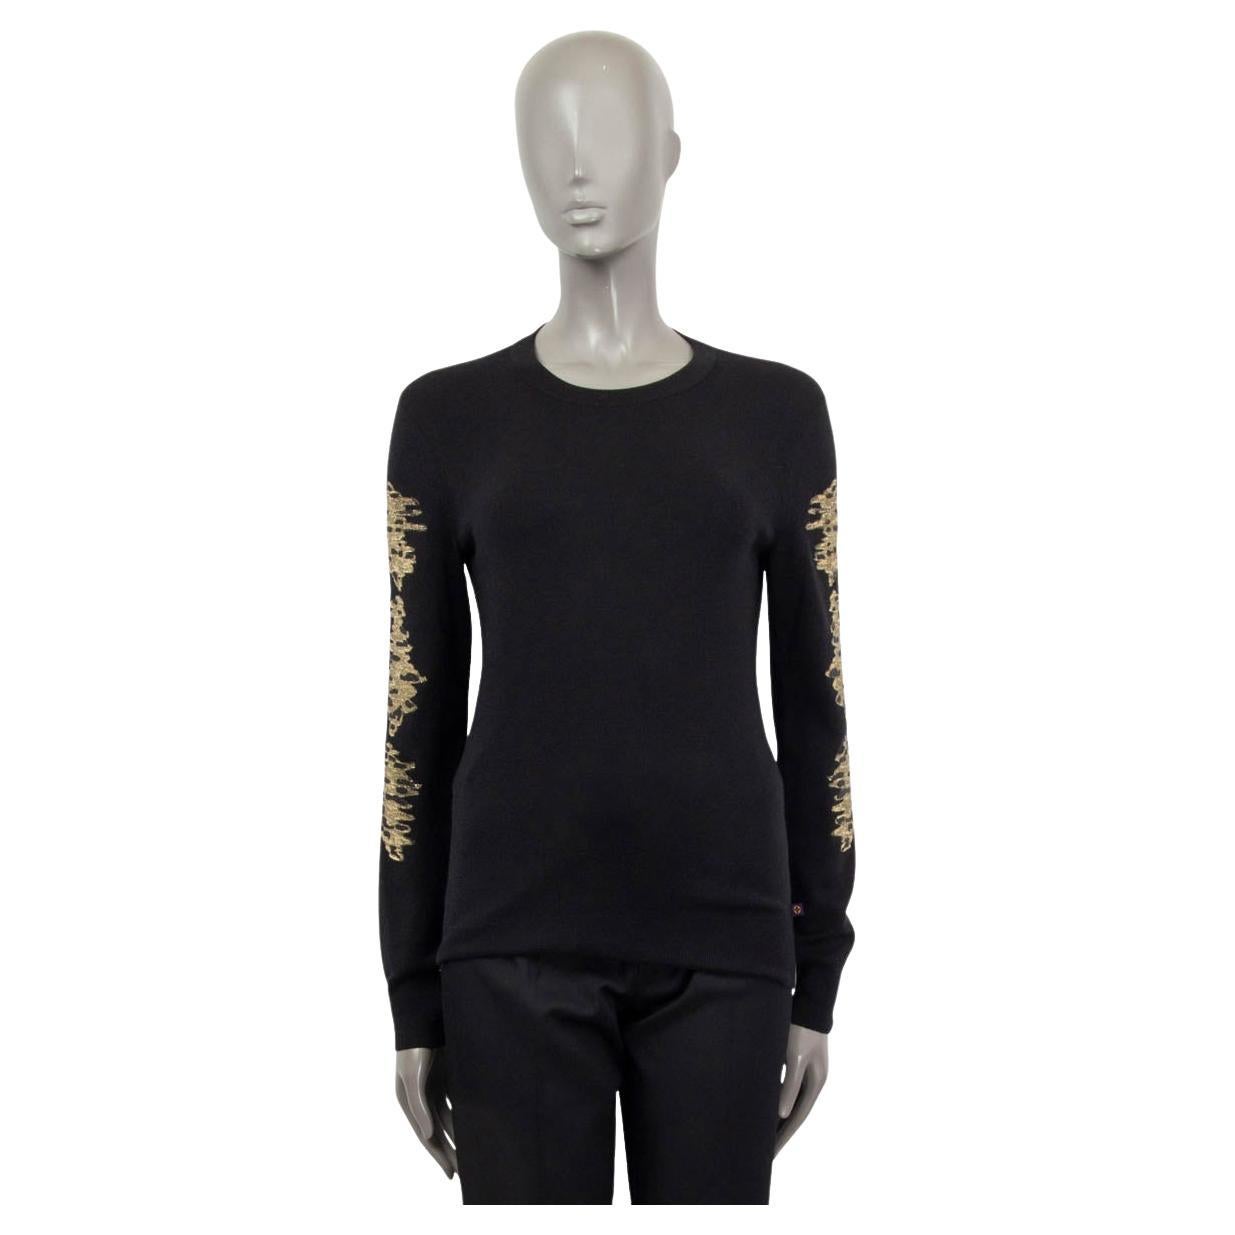 LOUIS VUITTON black cashmere blend GOLD EMBROIDERED Sweater S